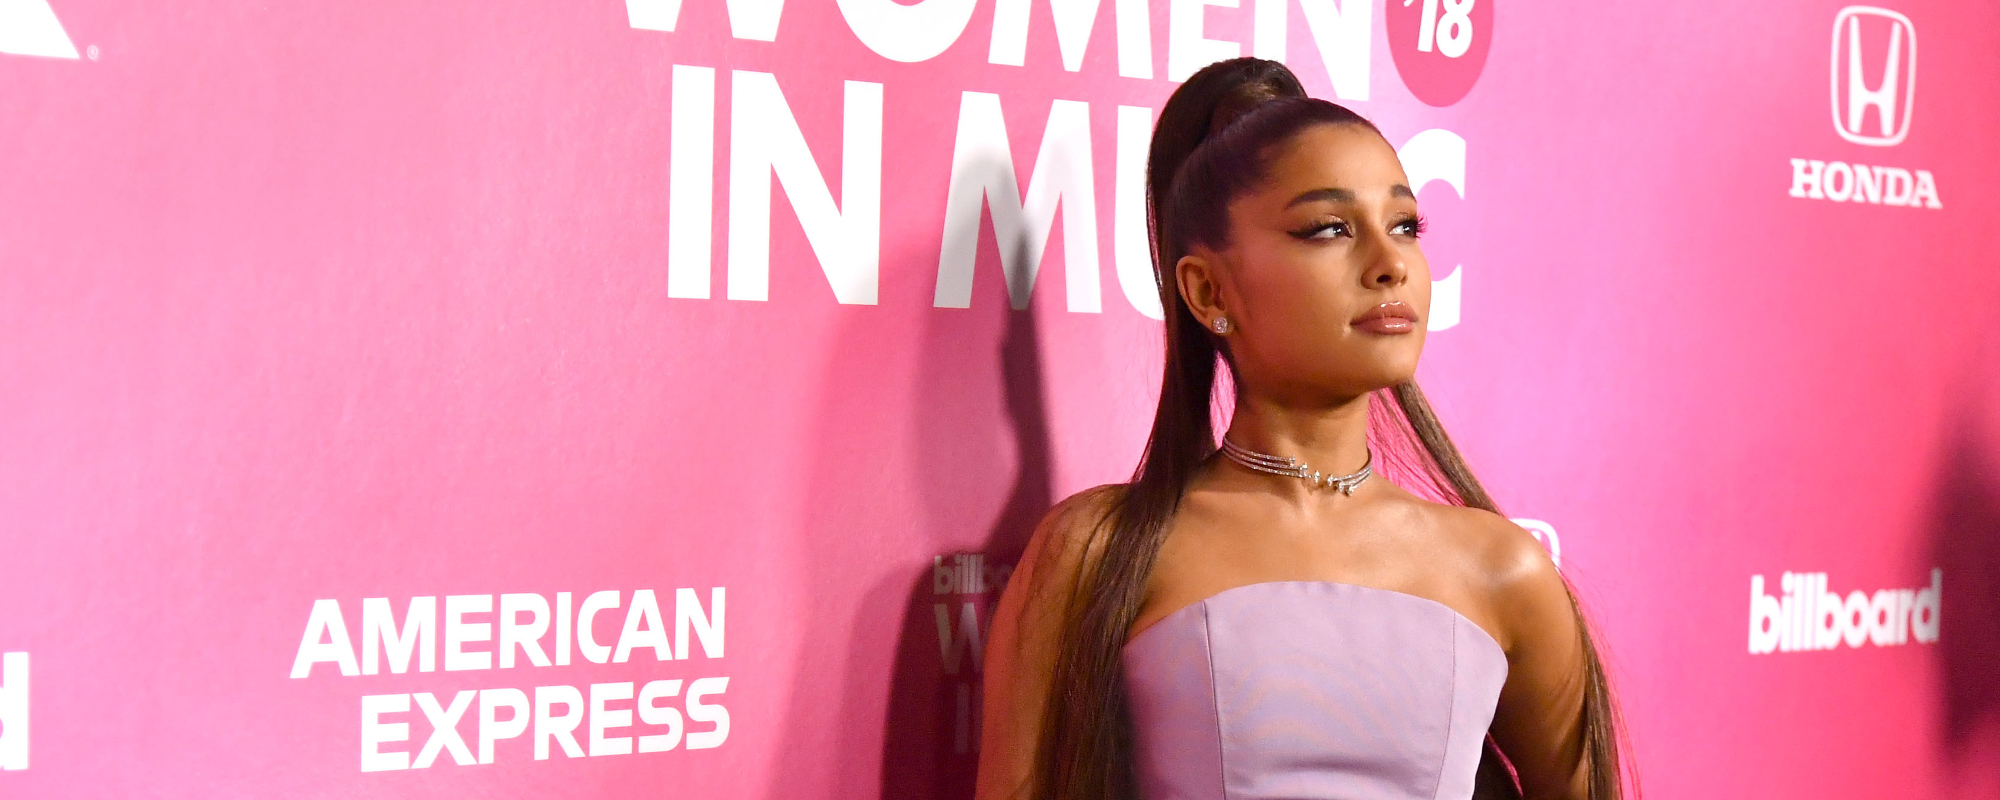 Ariana Grande Hints at New Music With Studio Pics—Billie Eilish, Selena Gomez, and More Can’t Contain Their Excitement